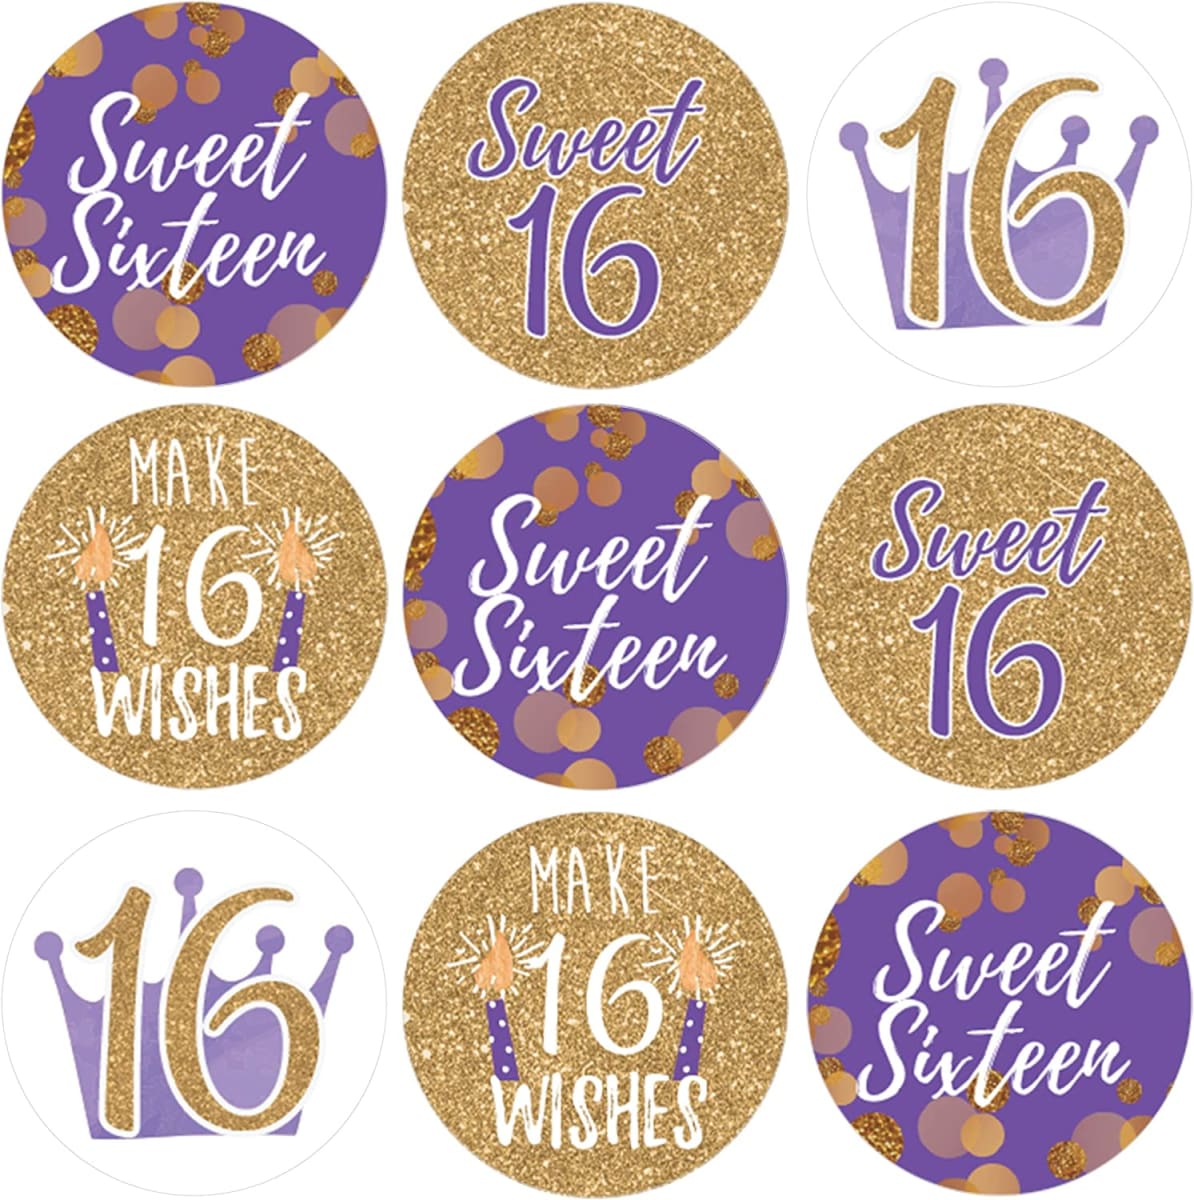 Purple and Gold Sweet Sixteen Kisses Candy Stickers